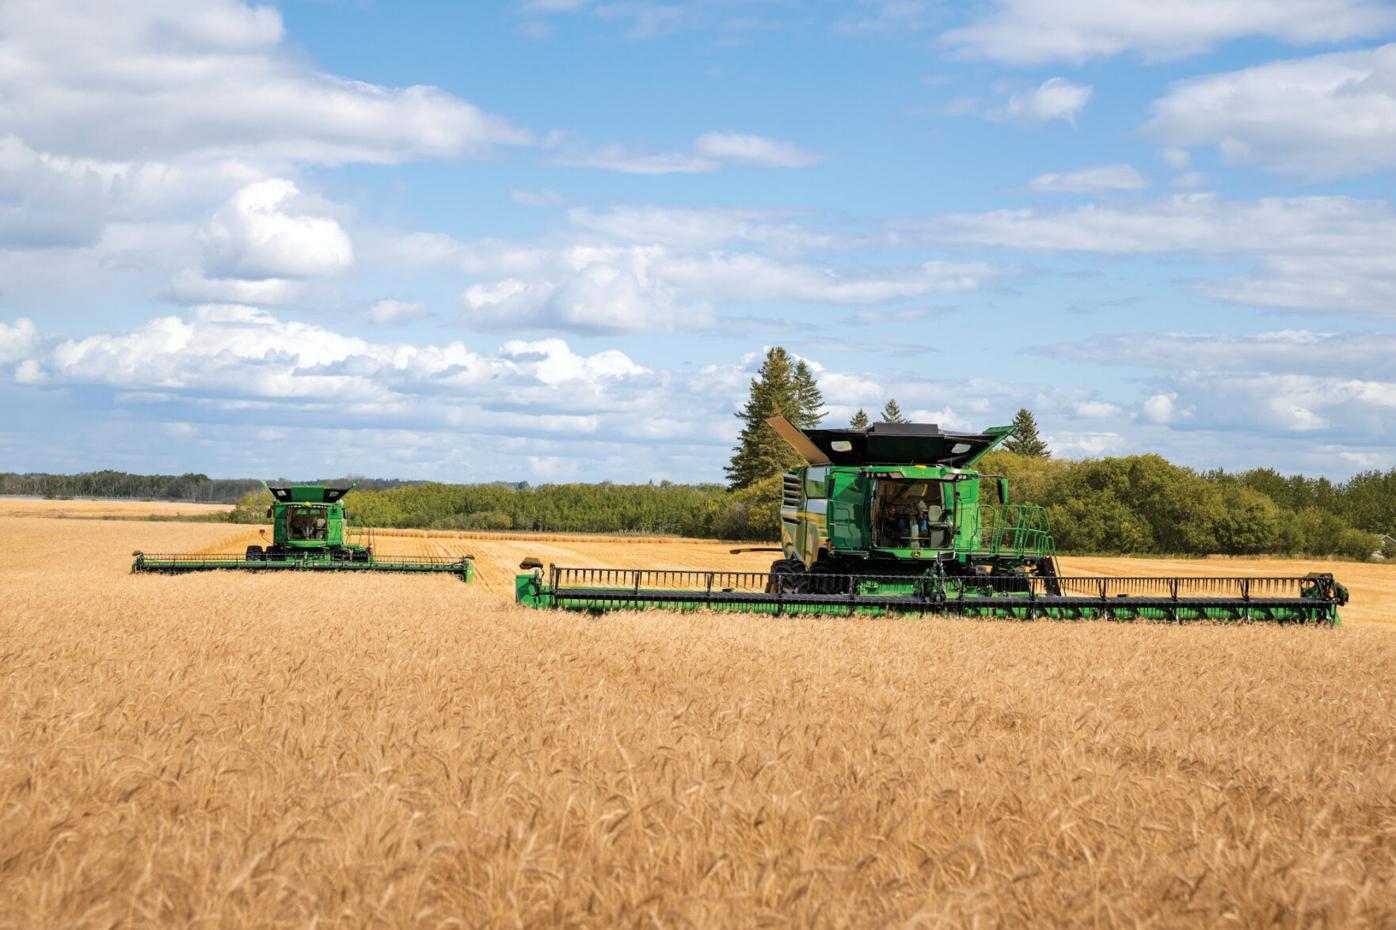 New Deere Combine Ready To Help High End Producers